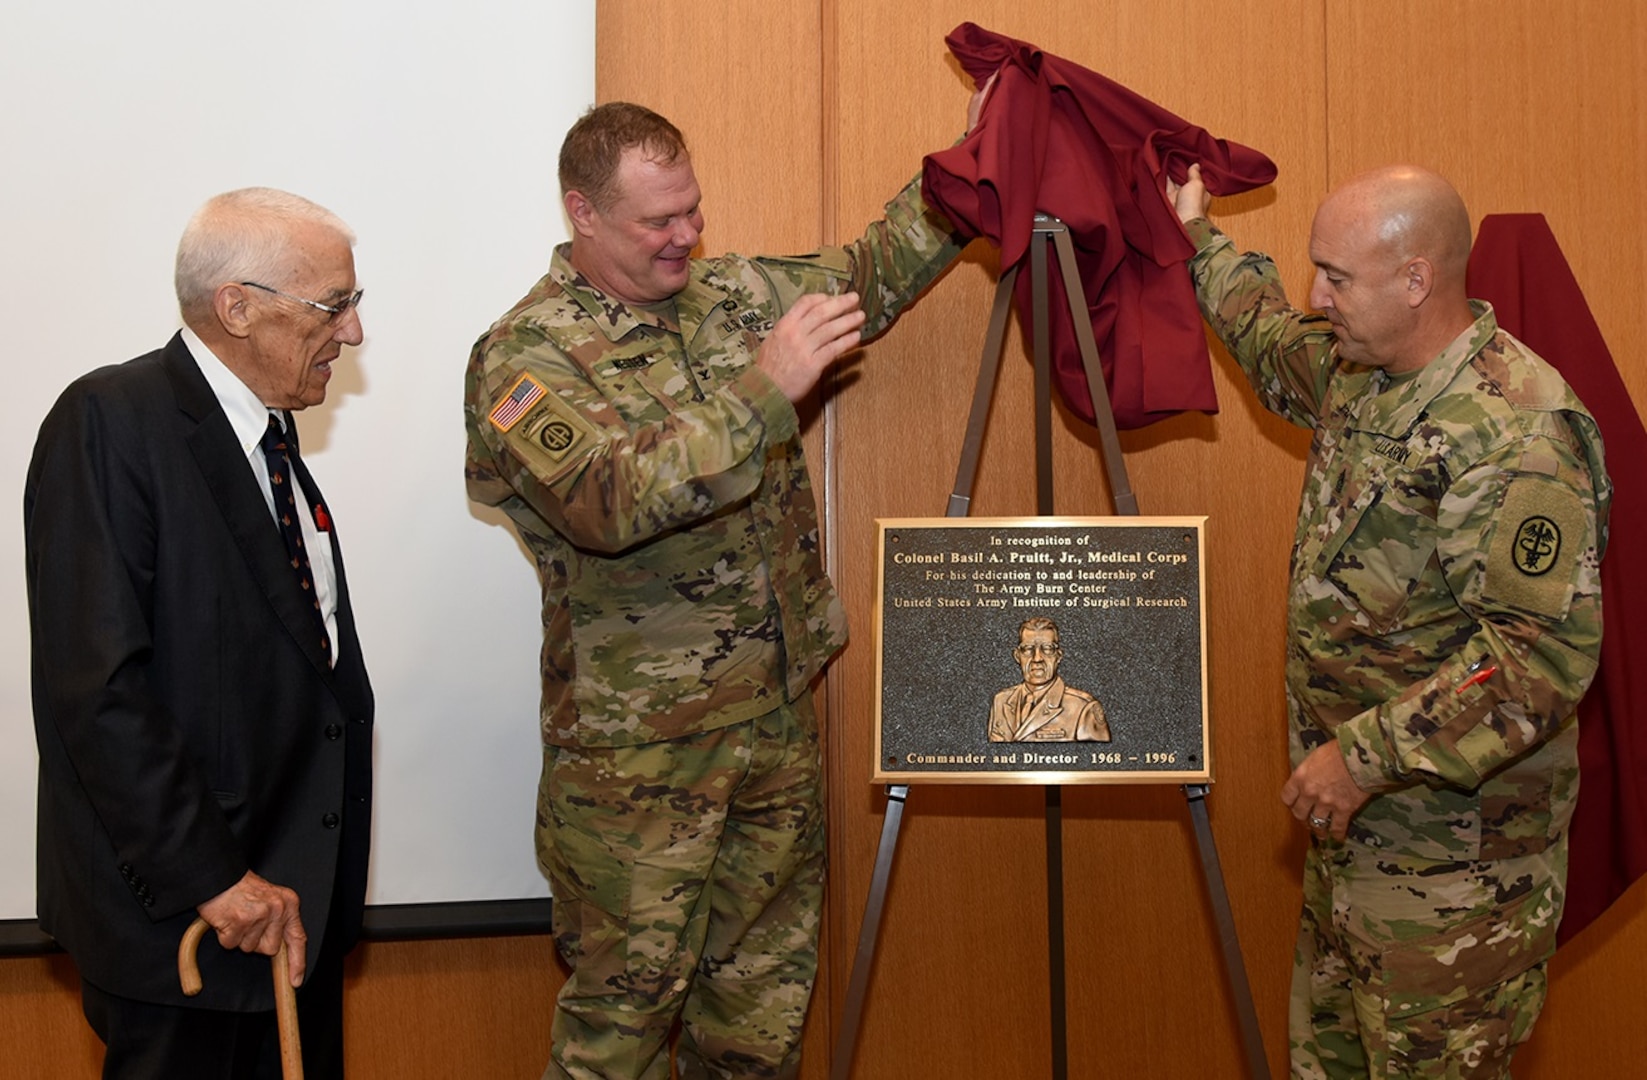 Col. (Dr.) Shawn C. Nessen (center), U.S. Army Institute of Surgical Research commander, and the USAISR Senior Enlisted Advisor, Sgt. Maj. William “Dave” Poist Jr., unveil a bronze plaque for Dr. Basil Pruitt Jr., during the USAISR 70thAnniversary Symposium July 18 at Joint Base San Antonio-Fort Sam Houston.